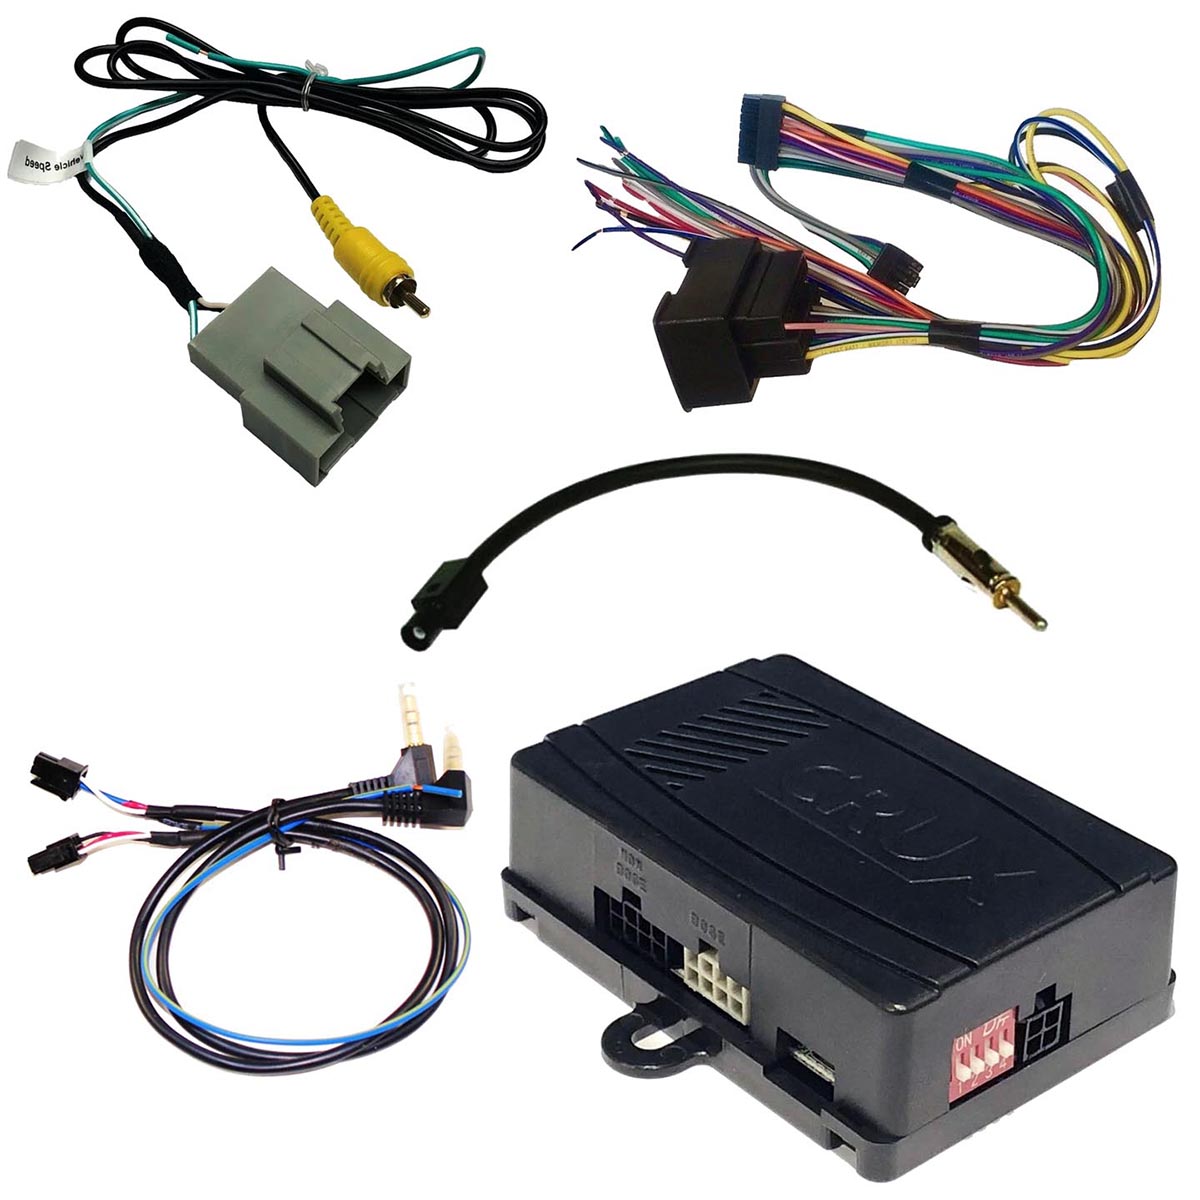 Crux Radio Replacement Interface With Swc And Factory Rvc Retention For ’10-’17 Gm Lan 29 Bit Vehicl